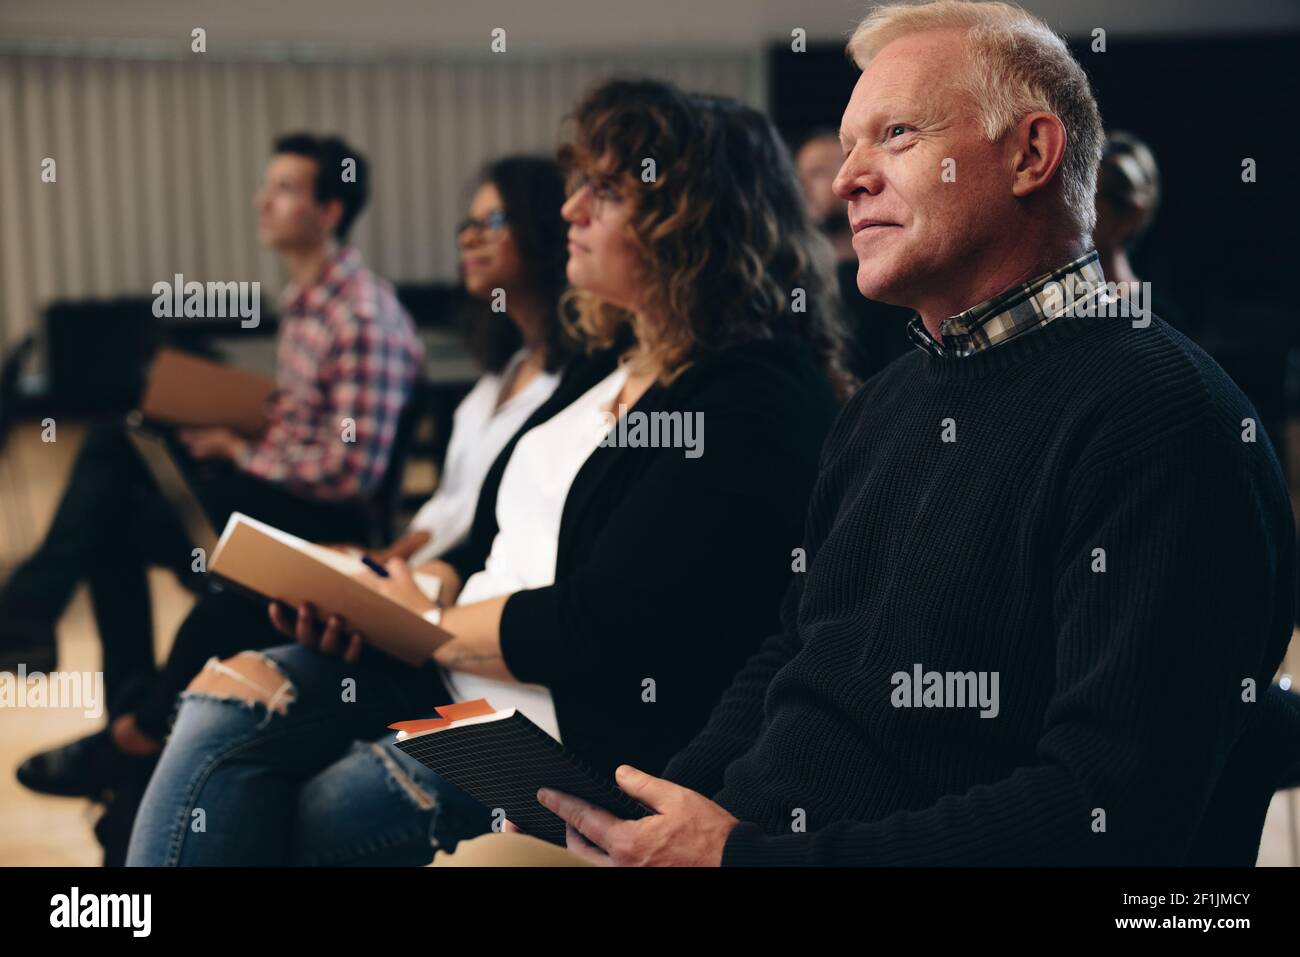 Senior man sitting in audience paying attention to the seminar. business people attending a corporate workshop. Stock Photo